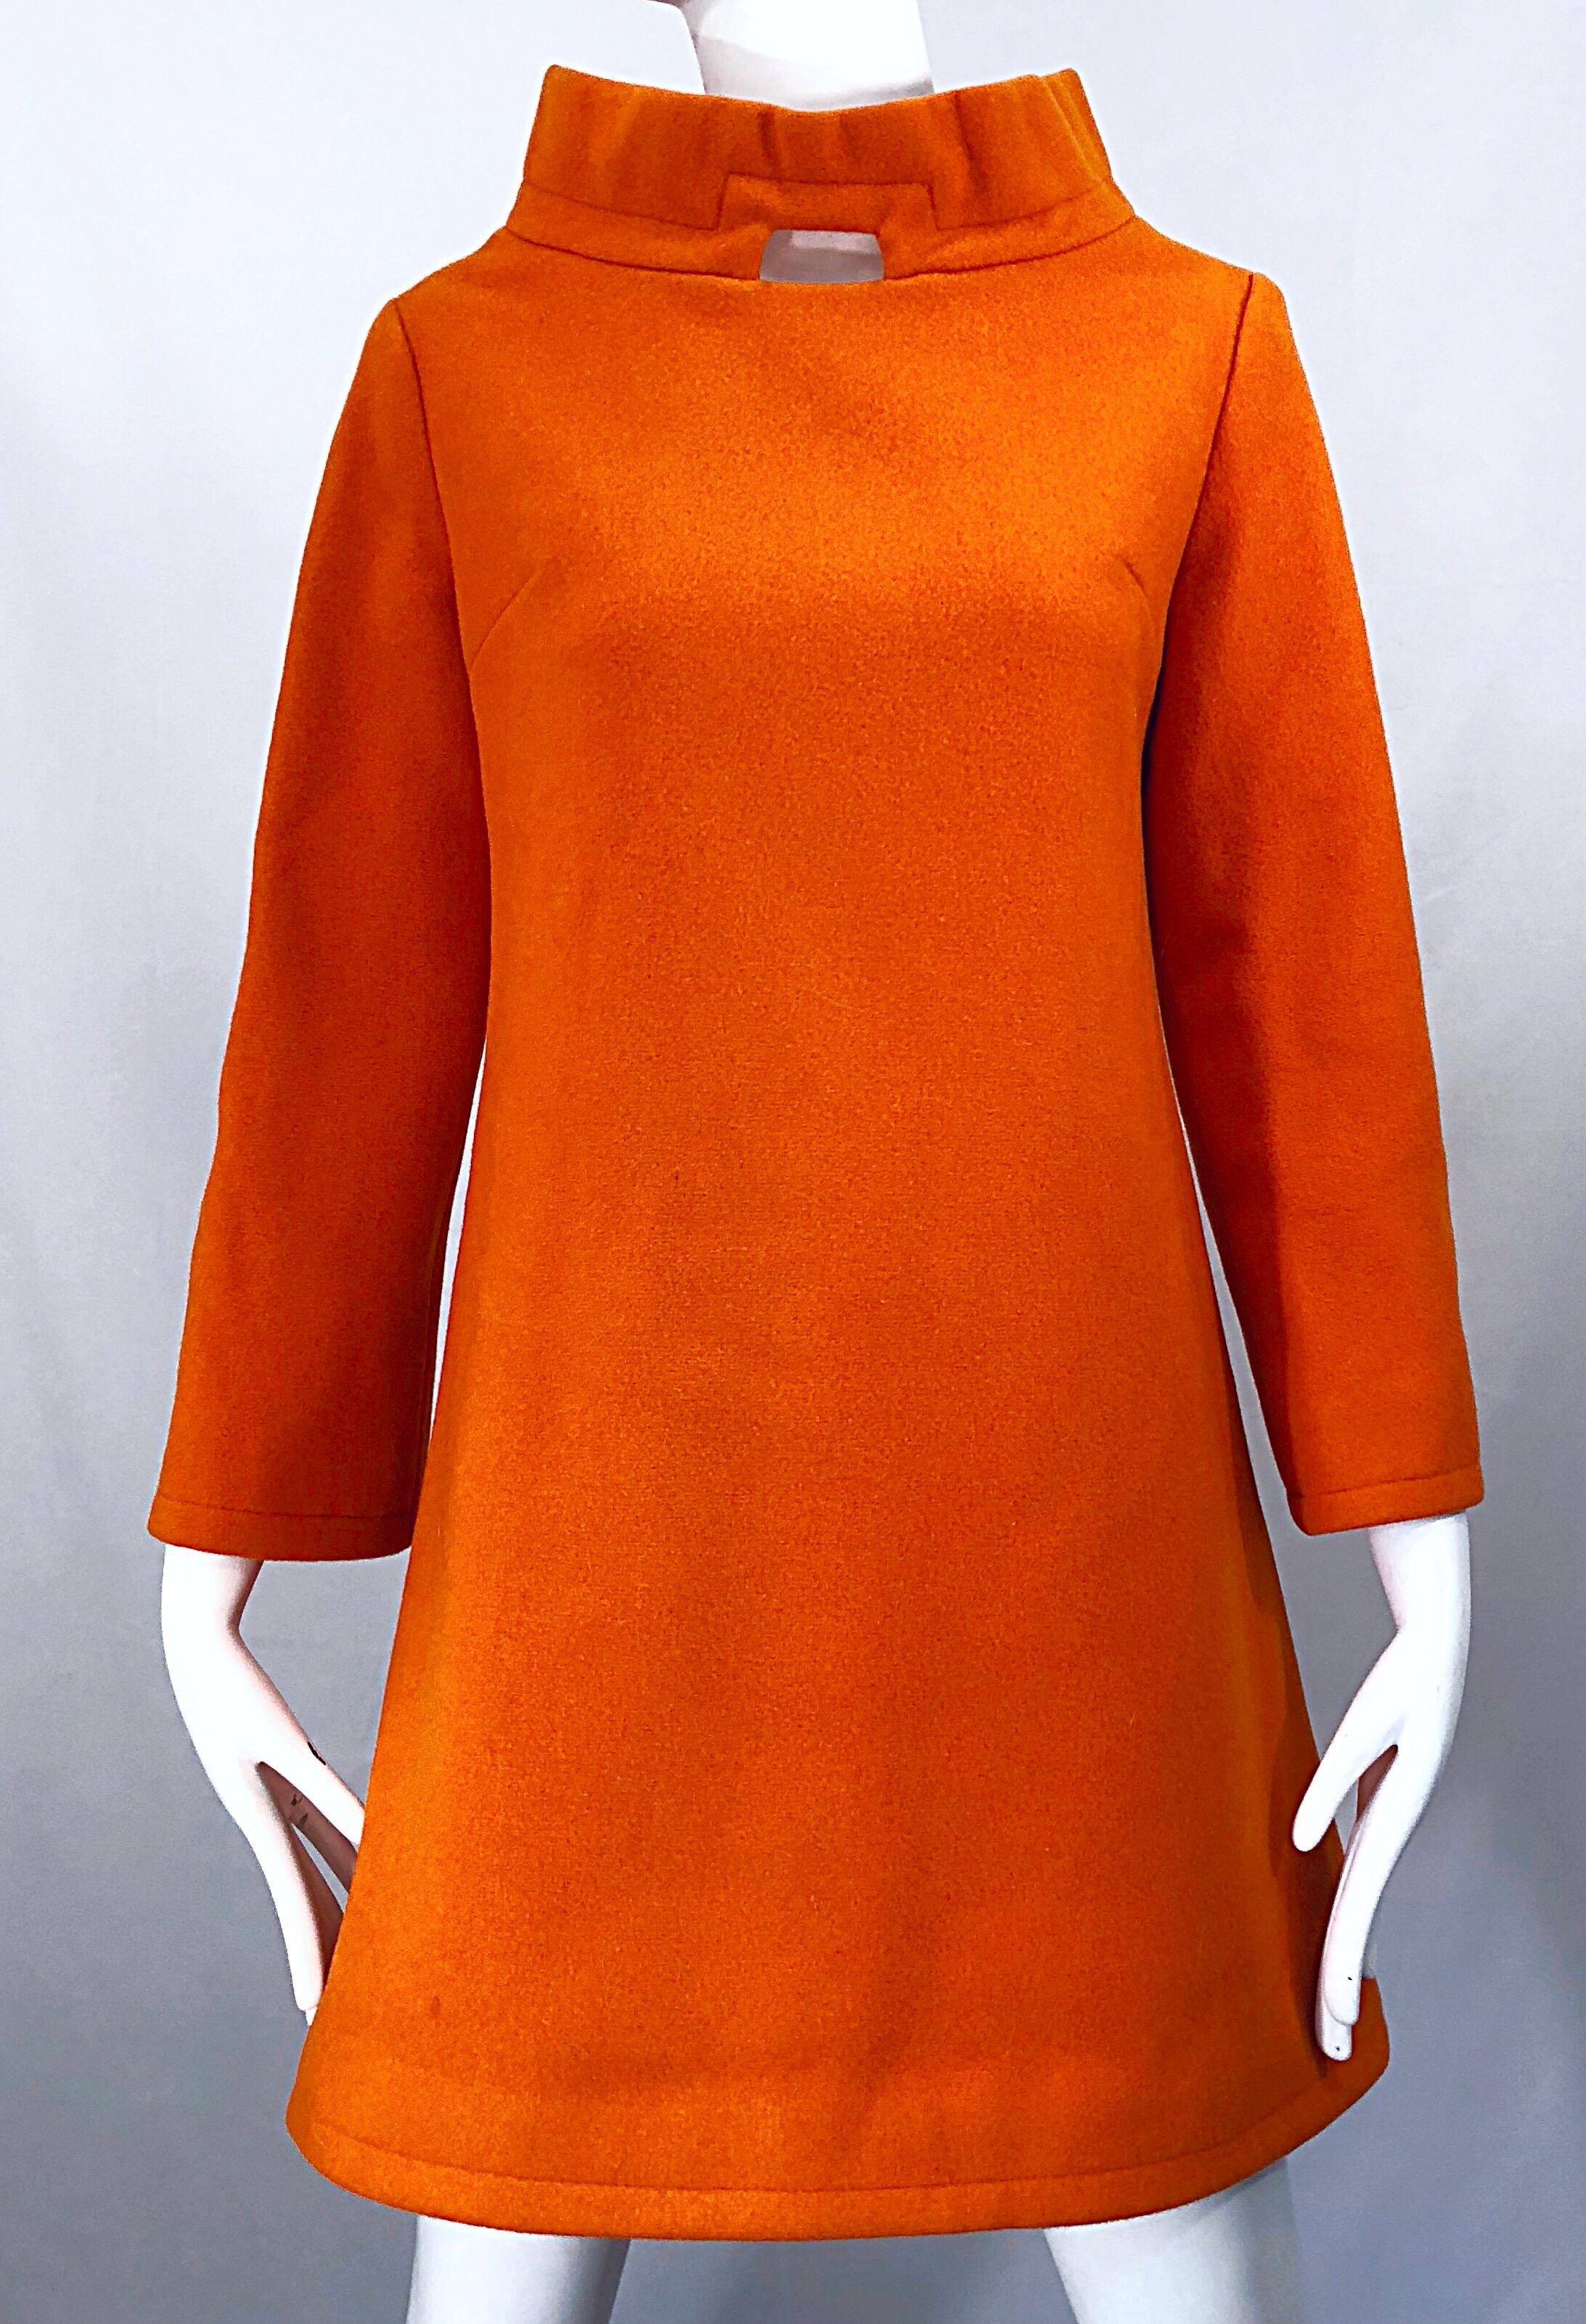 Red Chic 1960s Orange Wool Mod Space Age Cut Out A Line Vintage 60s Mini Dress Tunic